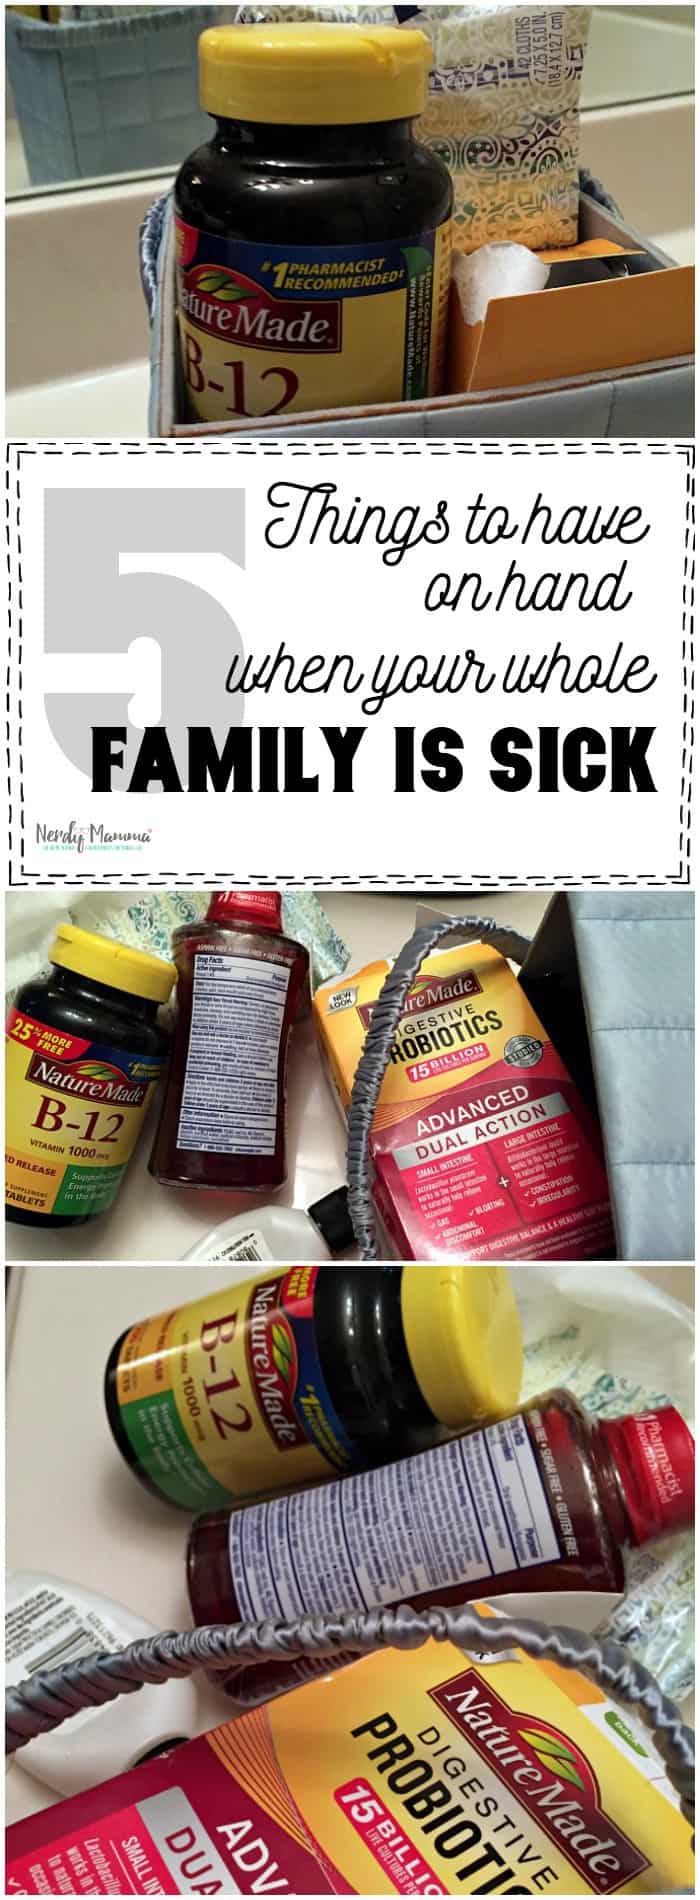 5 Things to have on hand when your whole family is sick